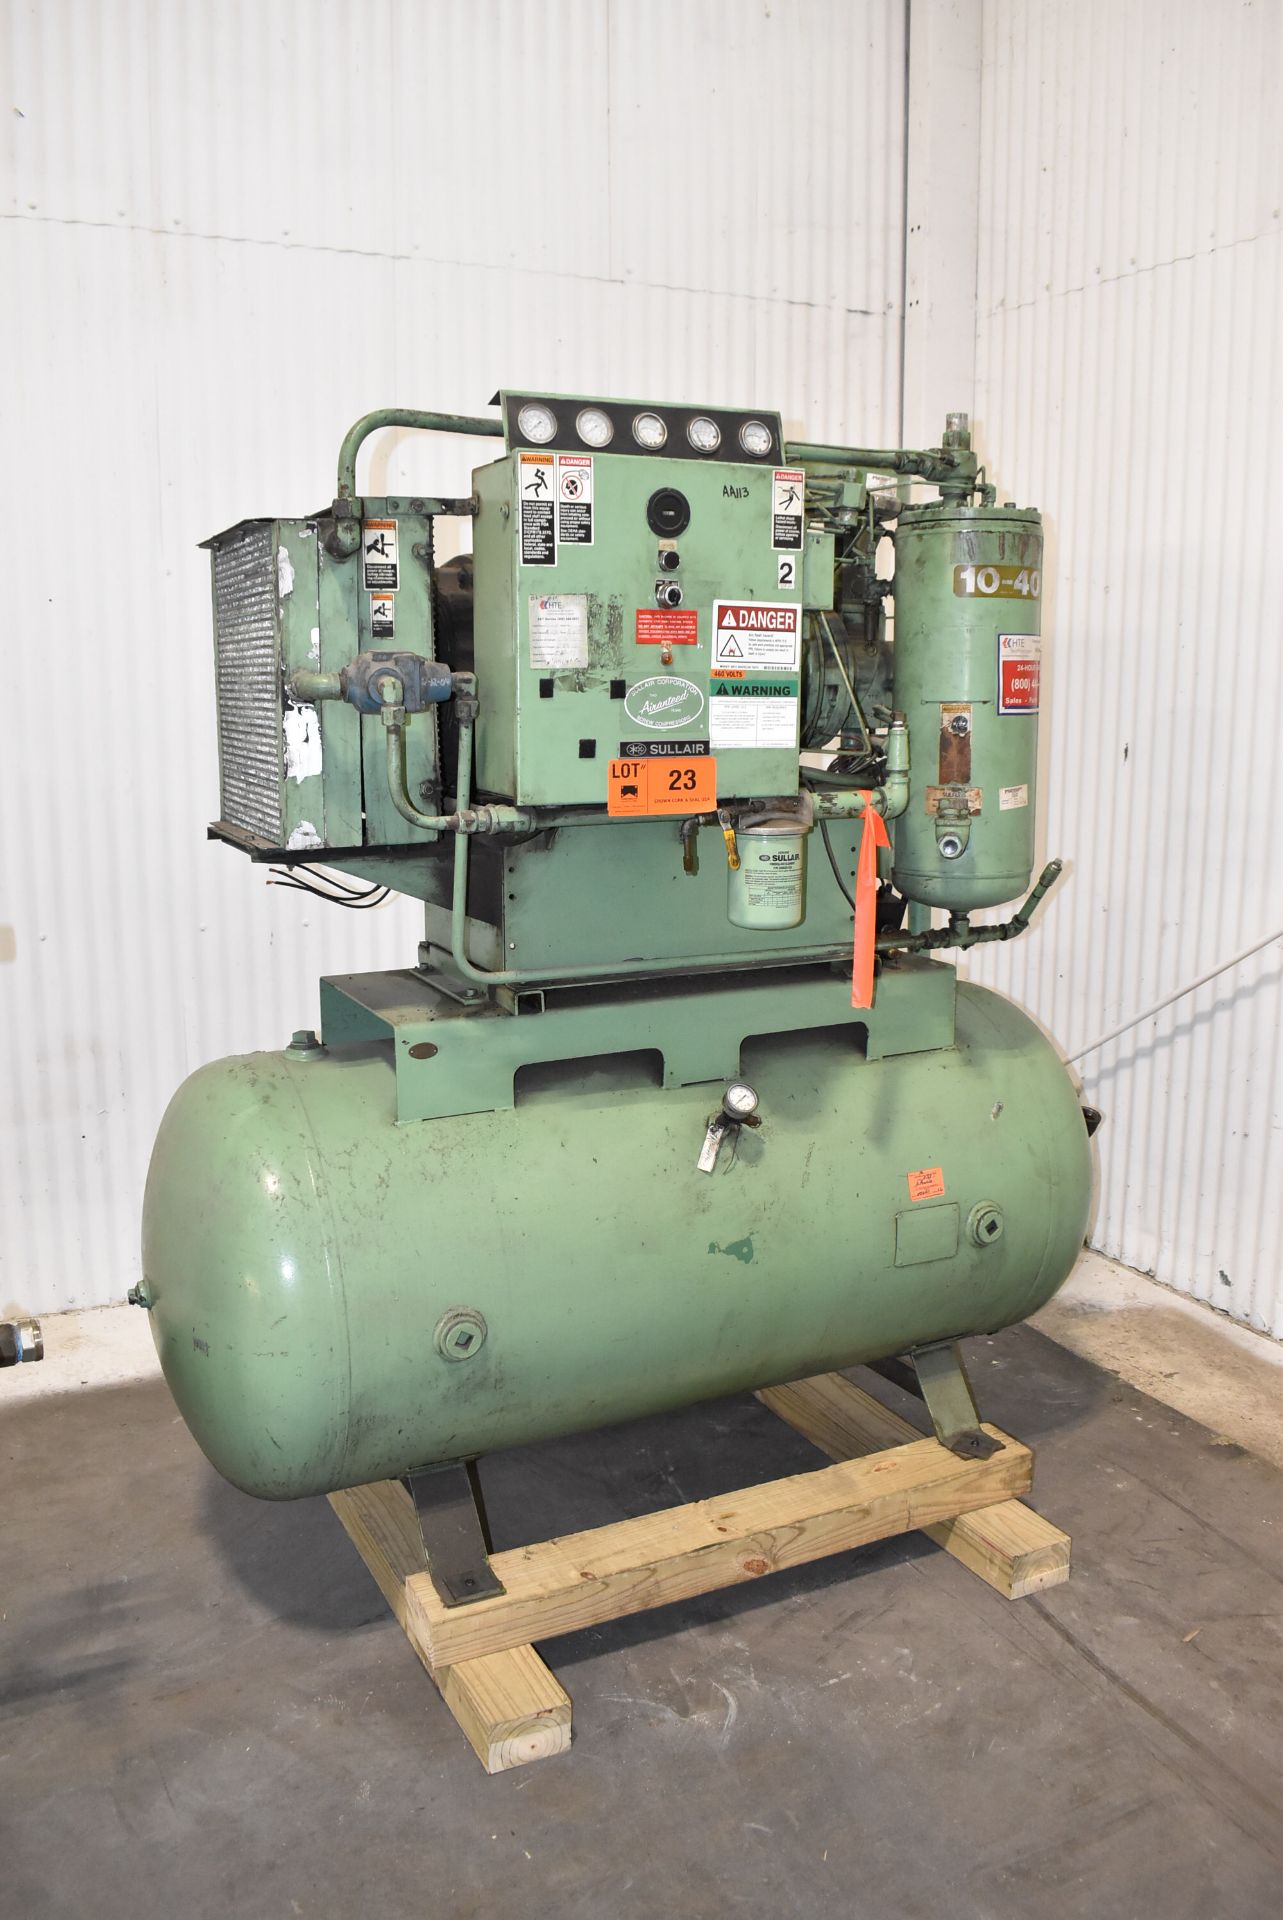 SULLAIR 10-40 ACAC 40HP ROTARY SCREW COMPRESSOR WITH 71395HRS ON METER, S/N 003-79397 - Image 2 of 6